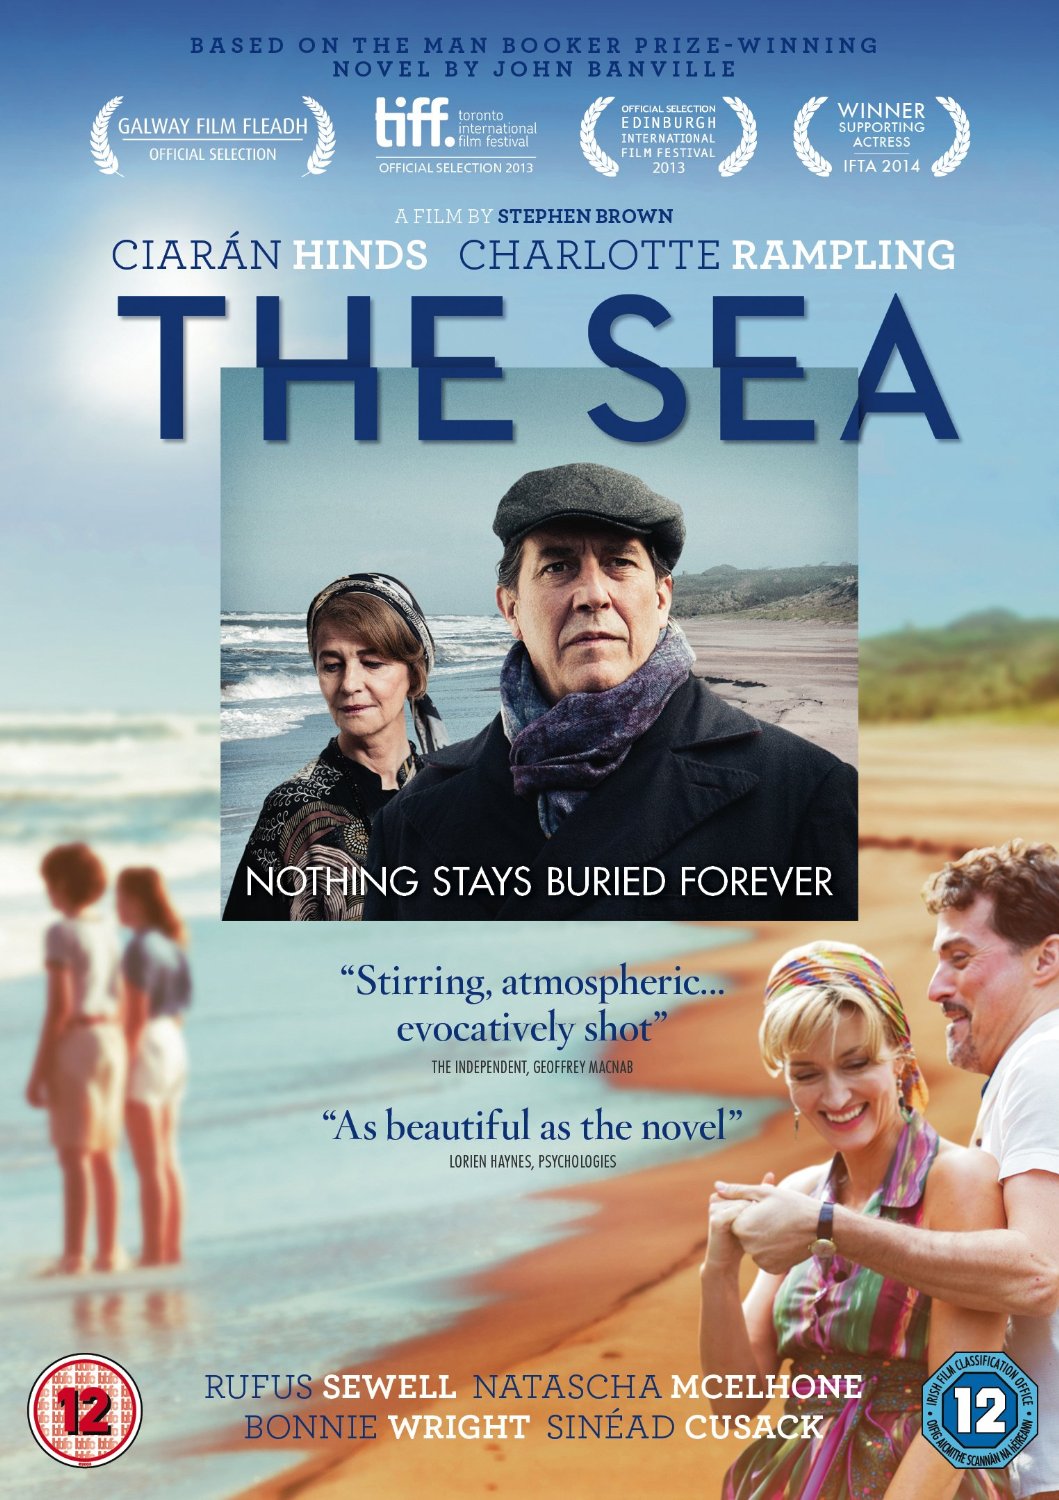 boom competitions - win a copy of The Sea on DVD